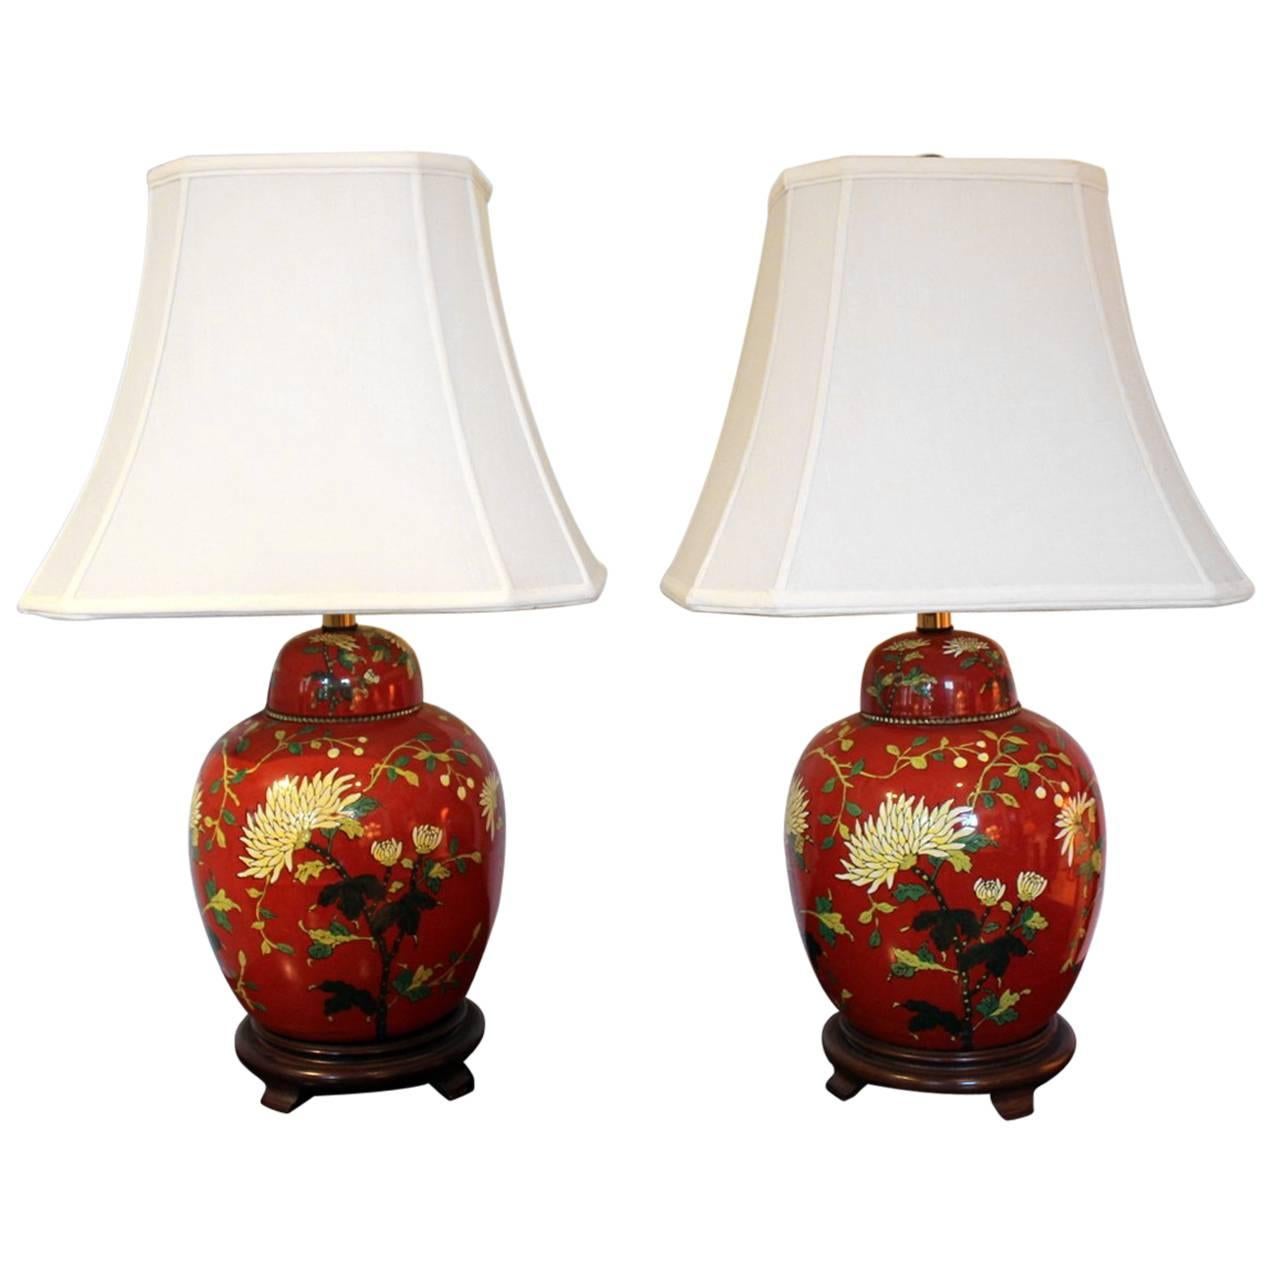 Pair of Iron Red and Enameled Porcelain Ginger Jar Lamps